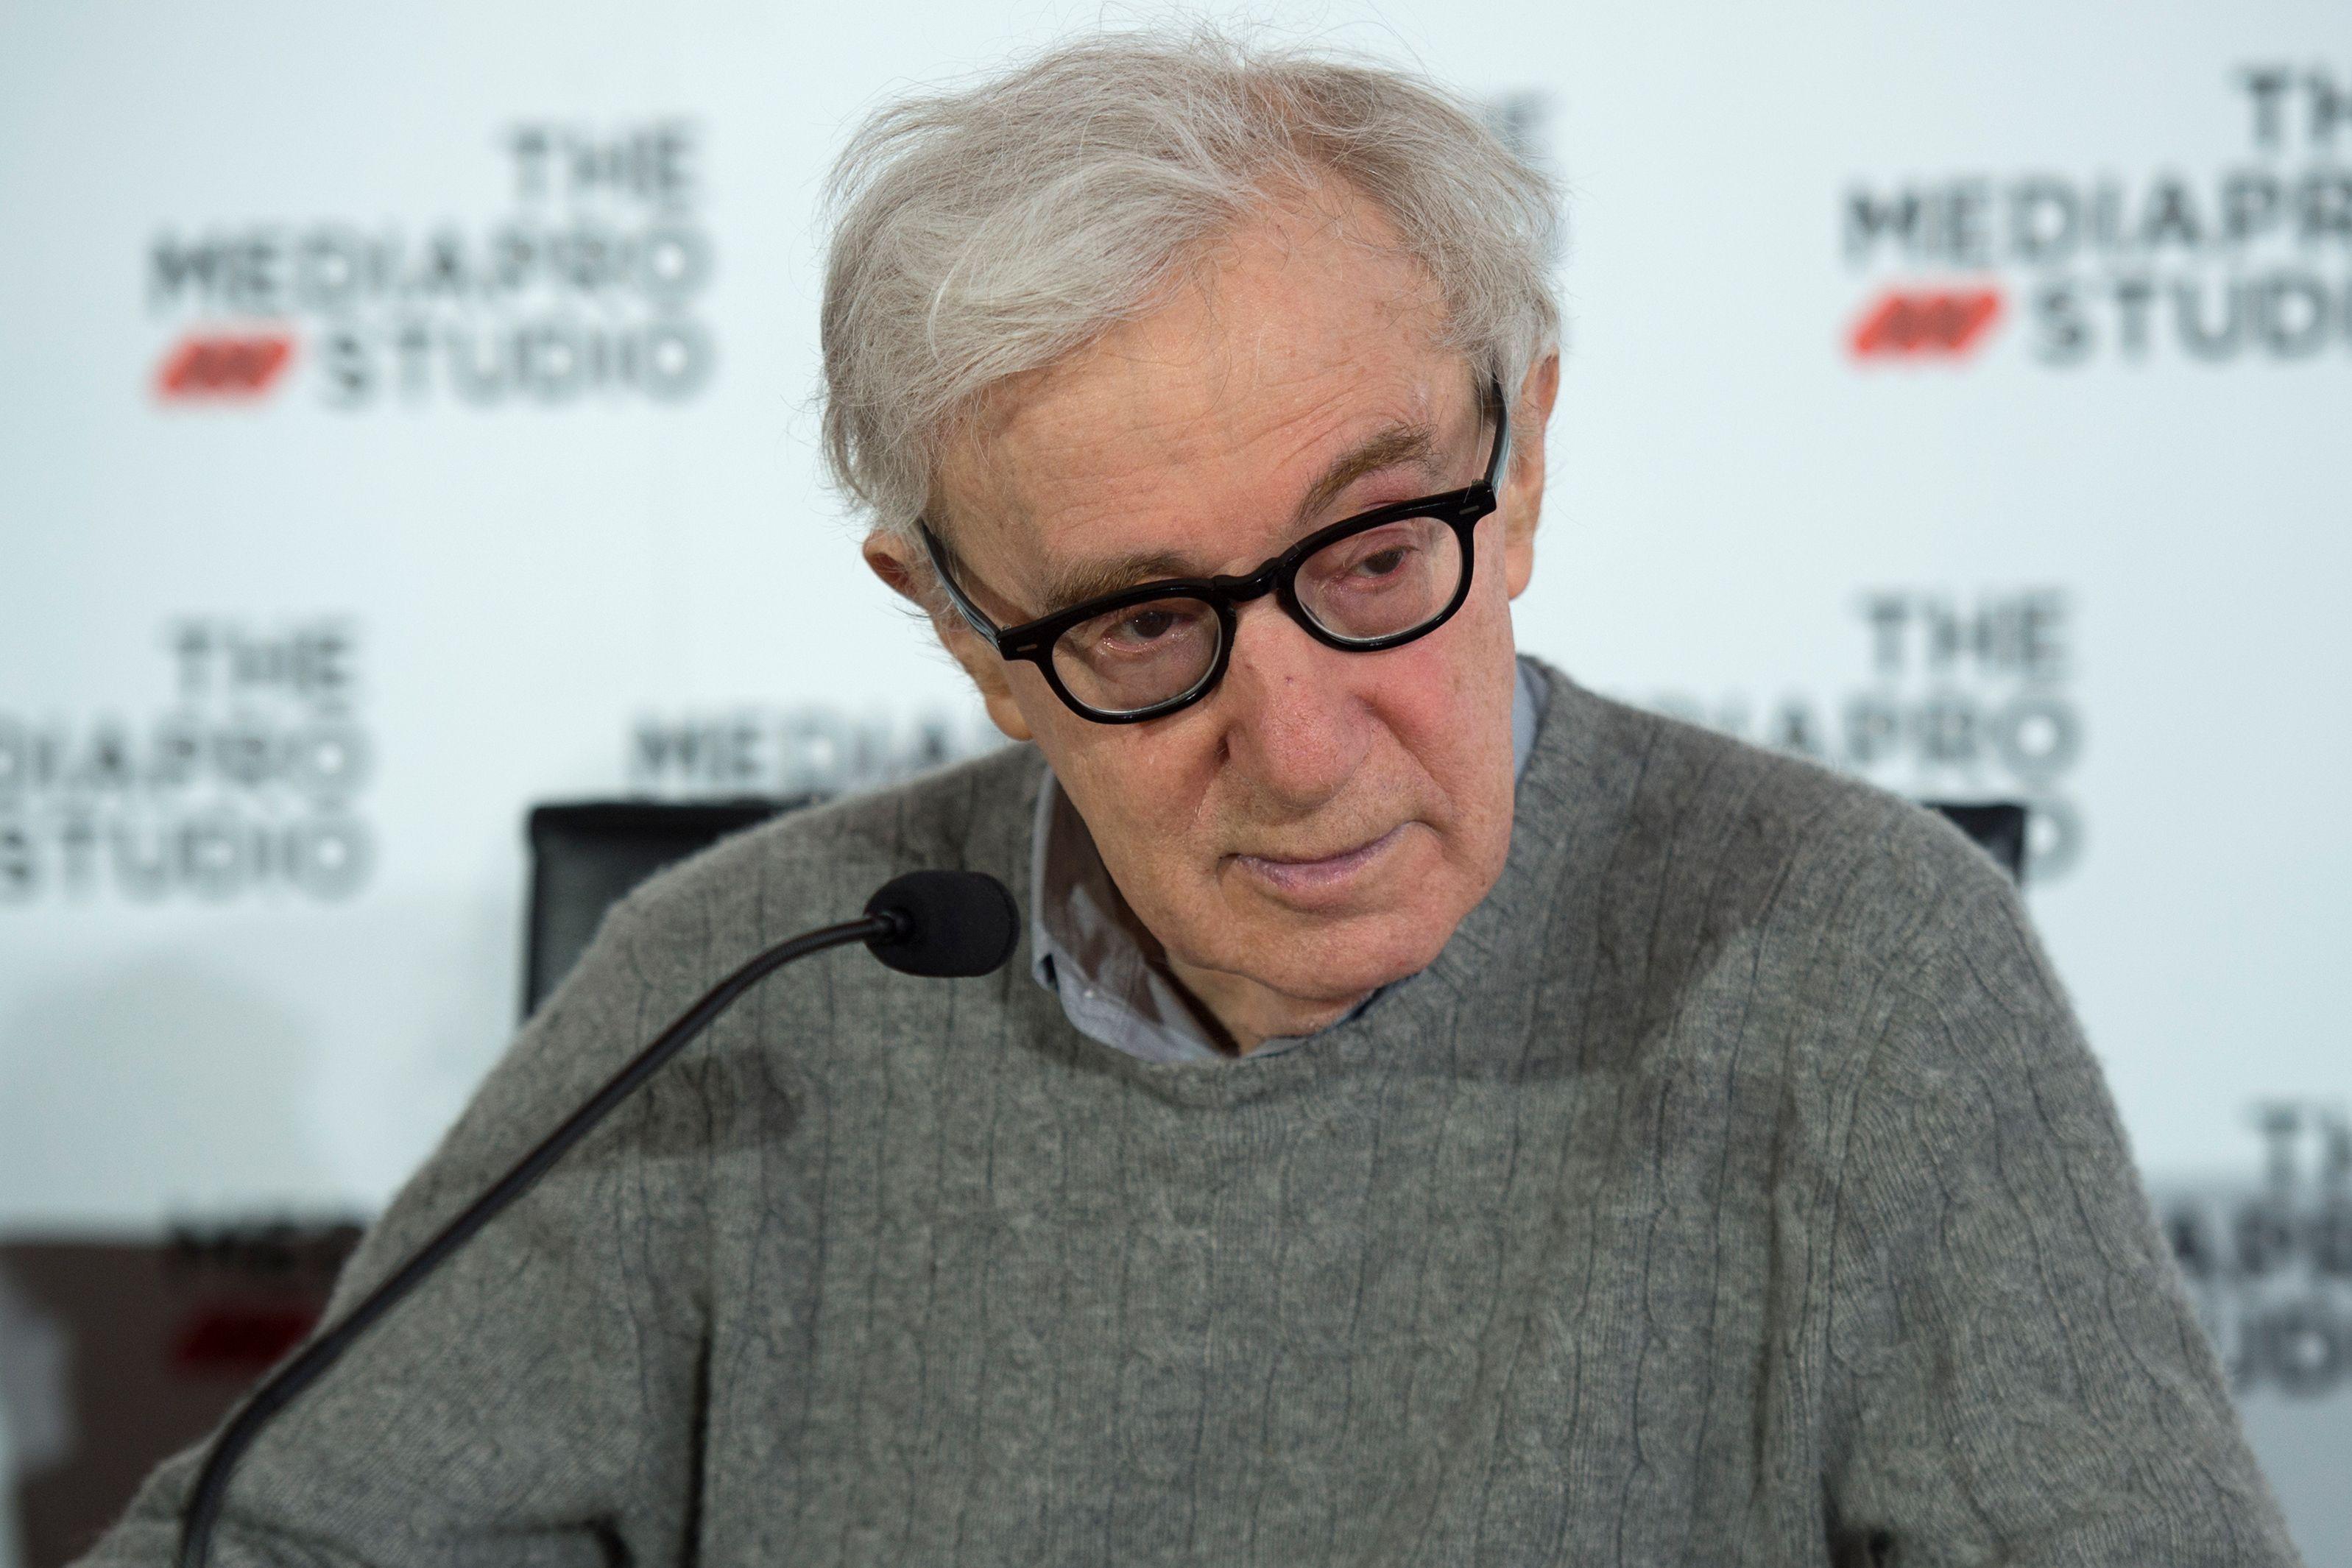 Woody Allen sits behind a microphone, wearing a gray sweater with a collared shirt under it.